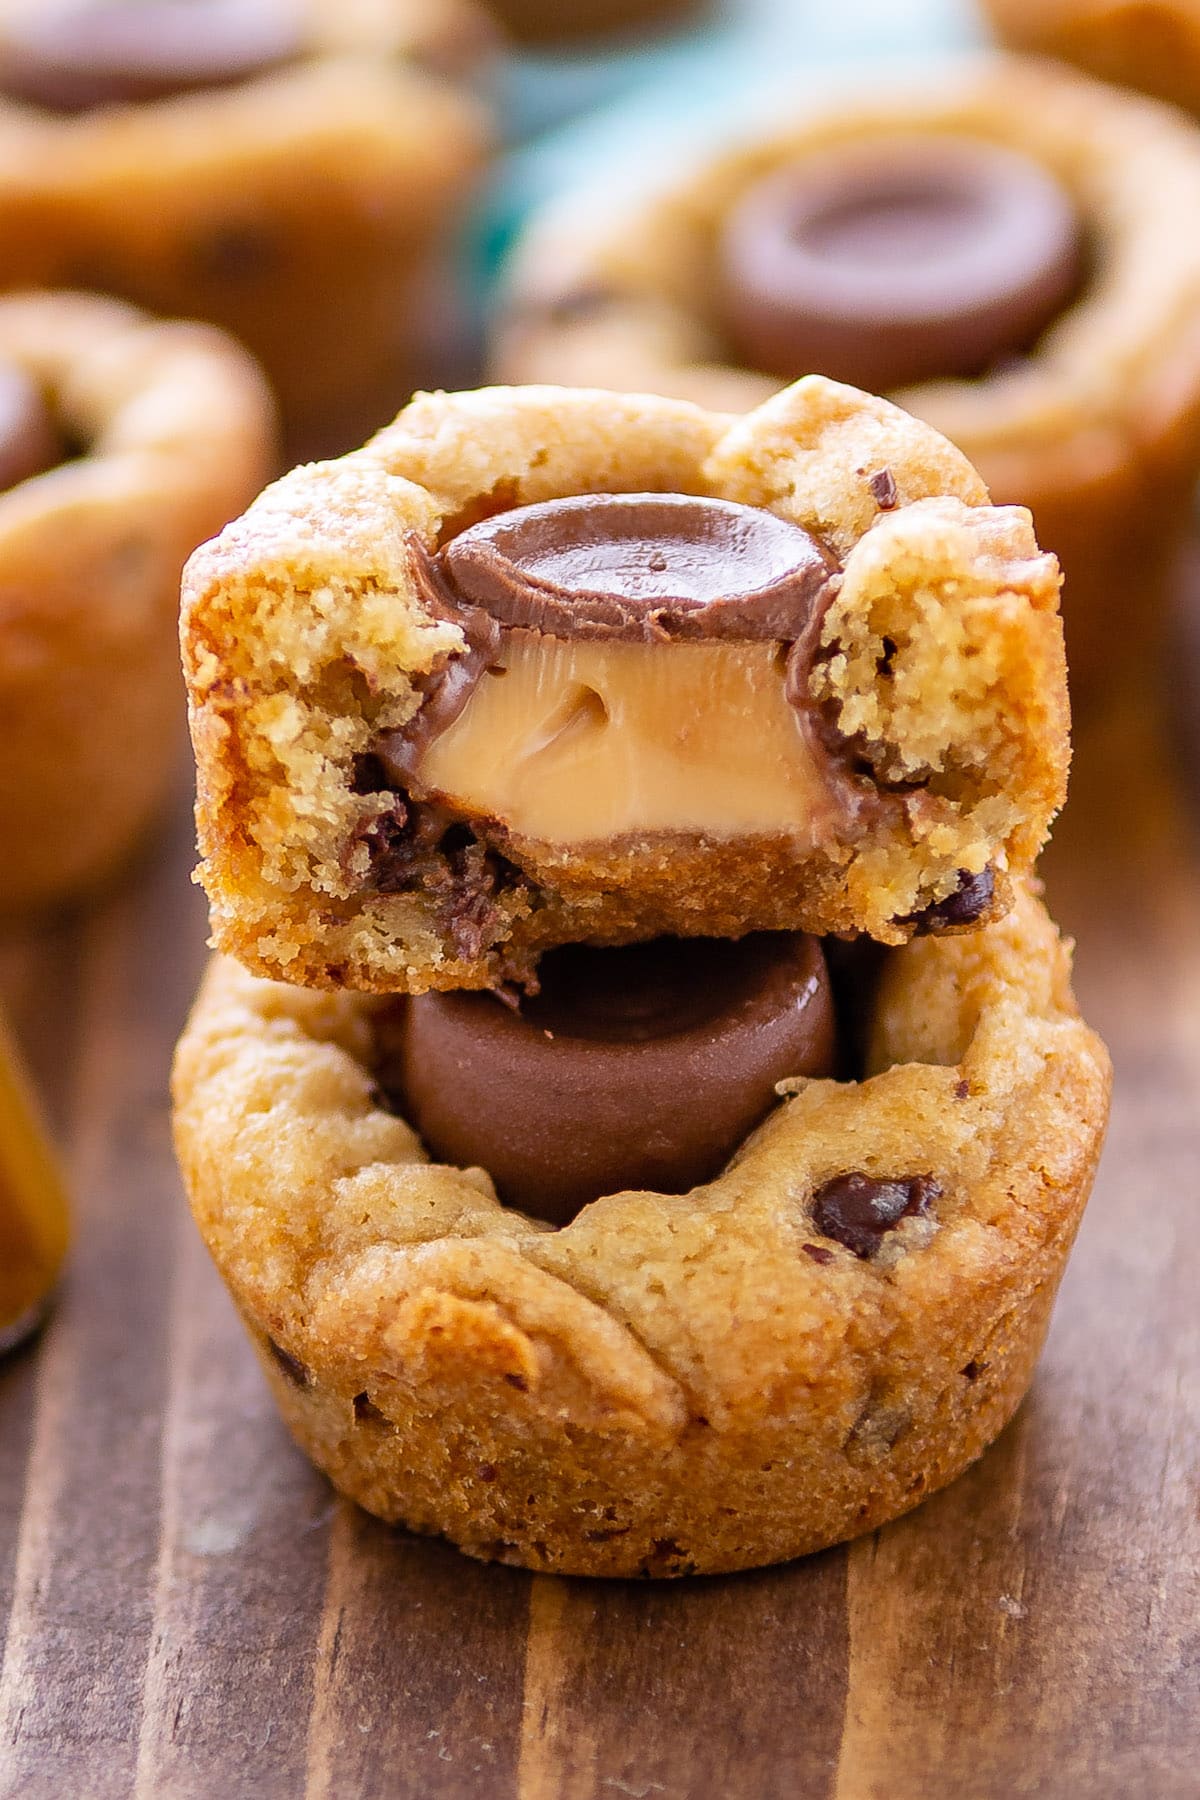 Cheesecake Stuffed Chocolate Chip Cookies - Cookies and Cups